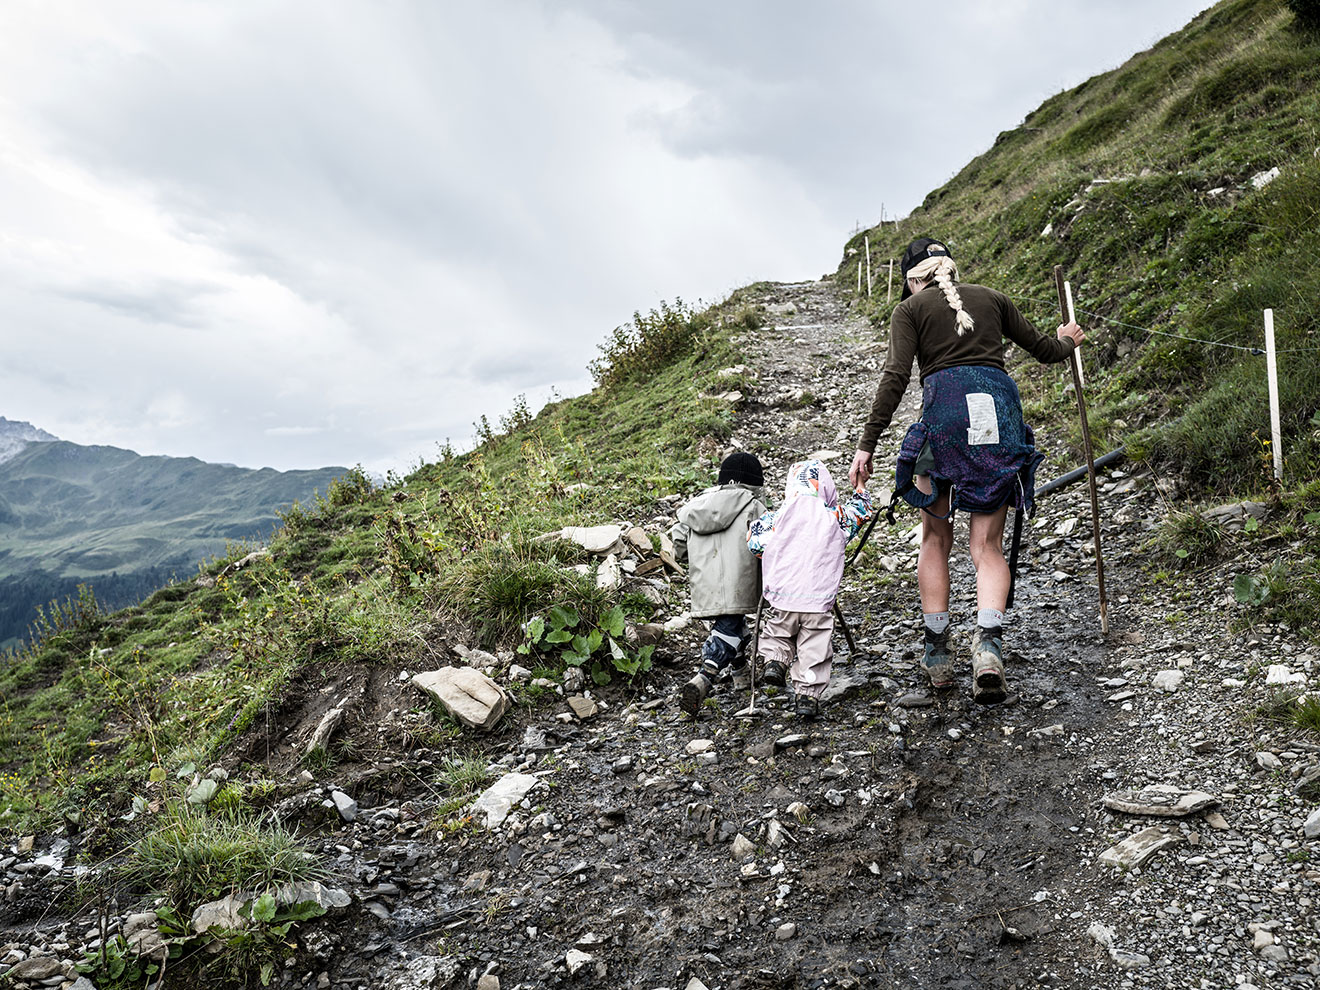 Katharina guides her two small children up a mountain path